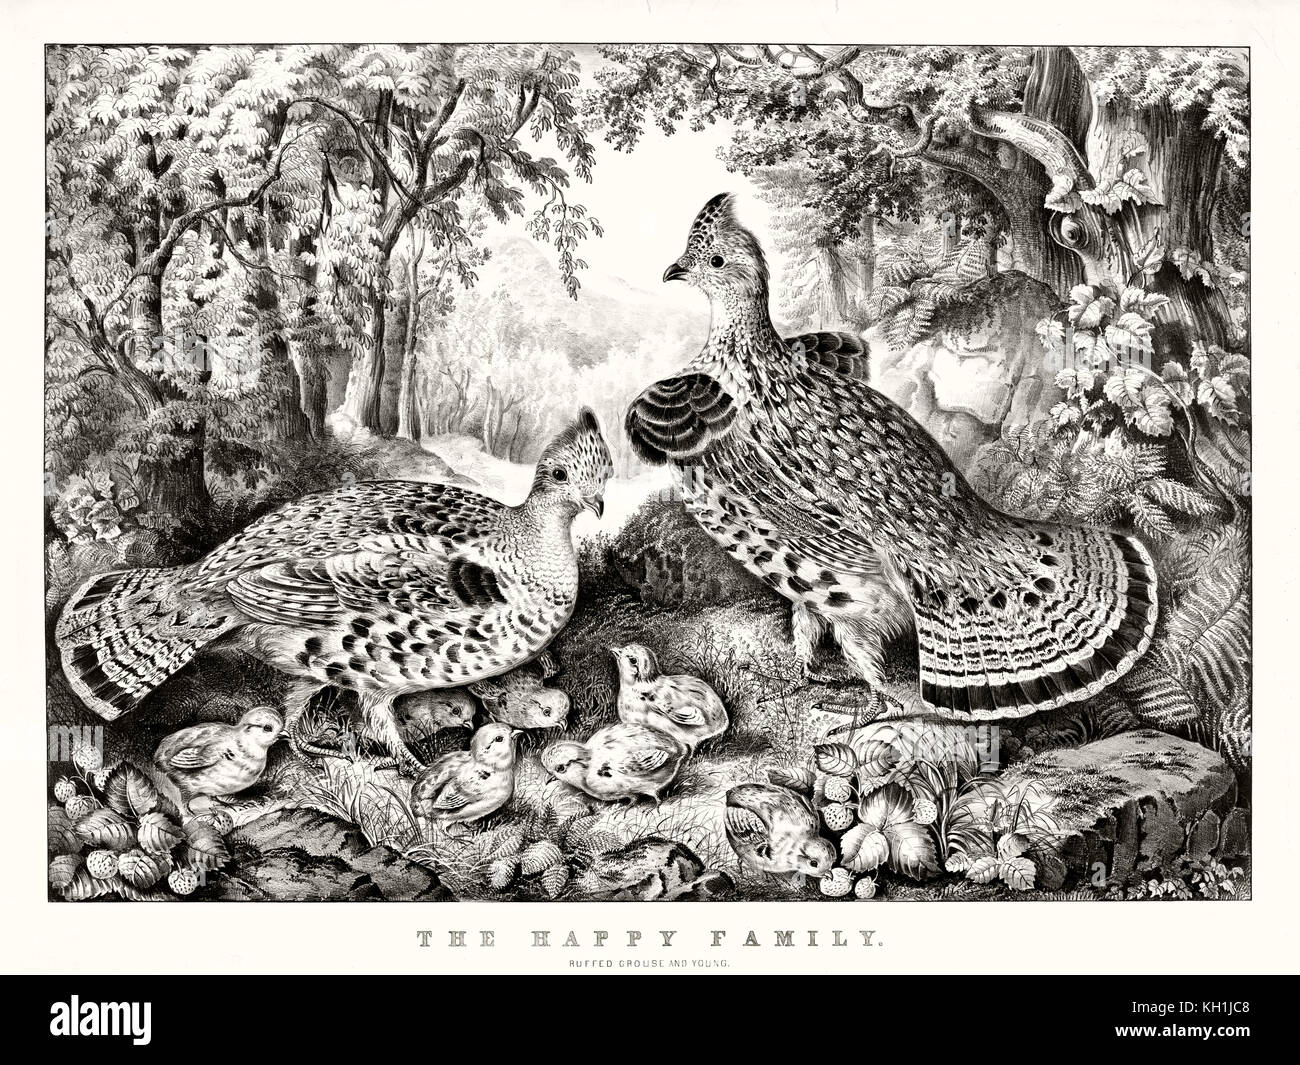 Old illustration of Ruffed Grouse (Bonasa umbellus). By Currier & Ives, publ. in New York, 1866 Stock Photo